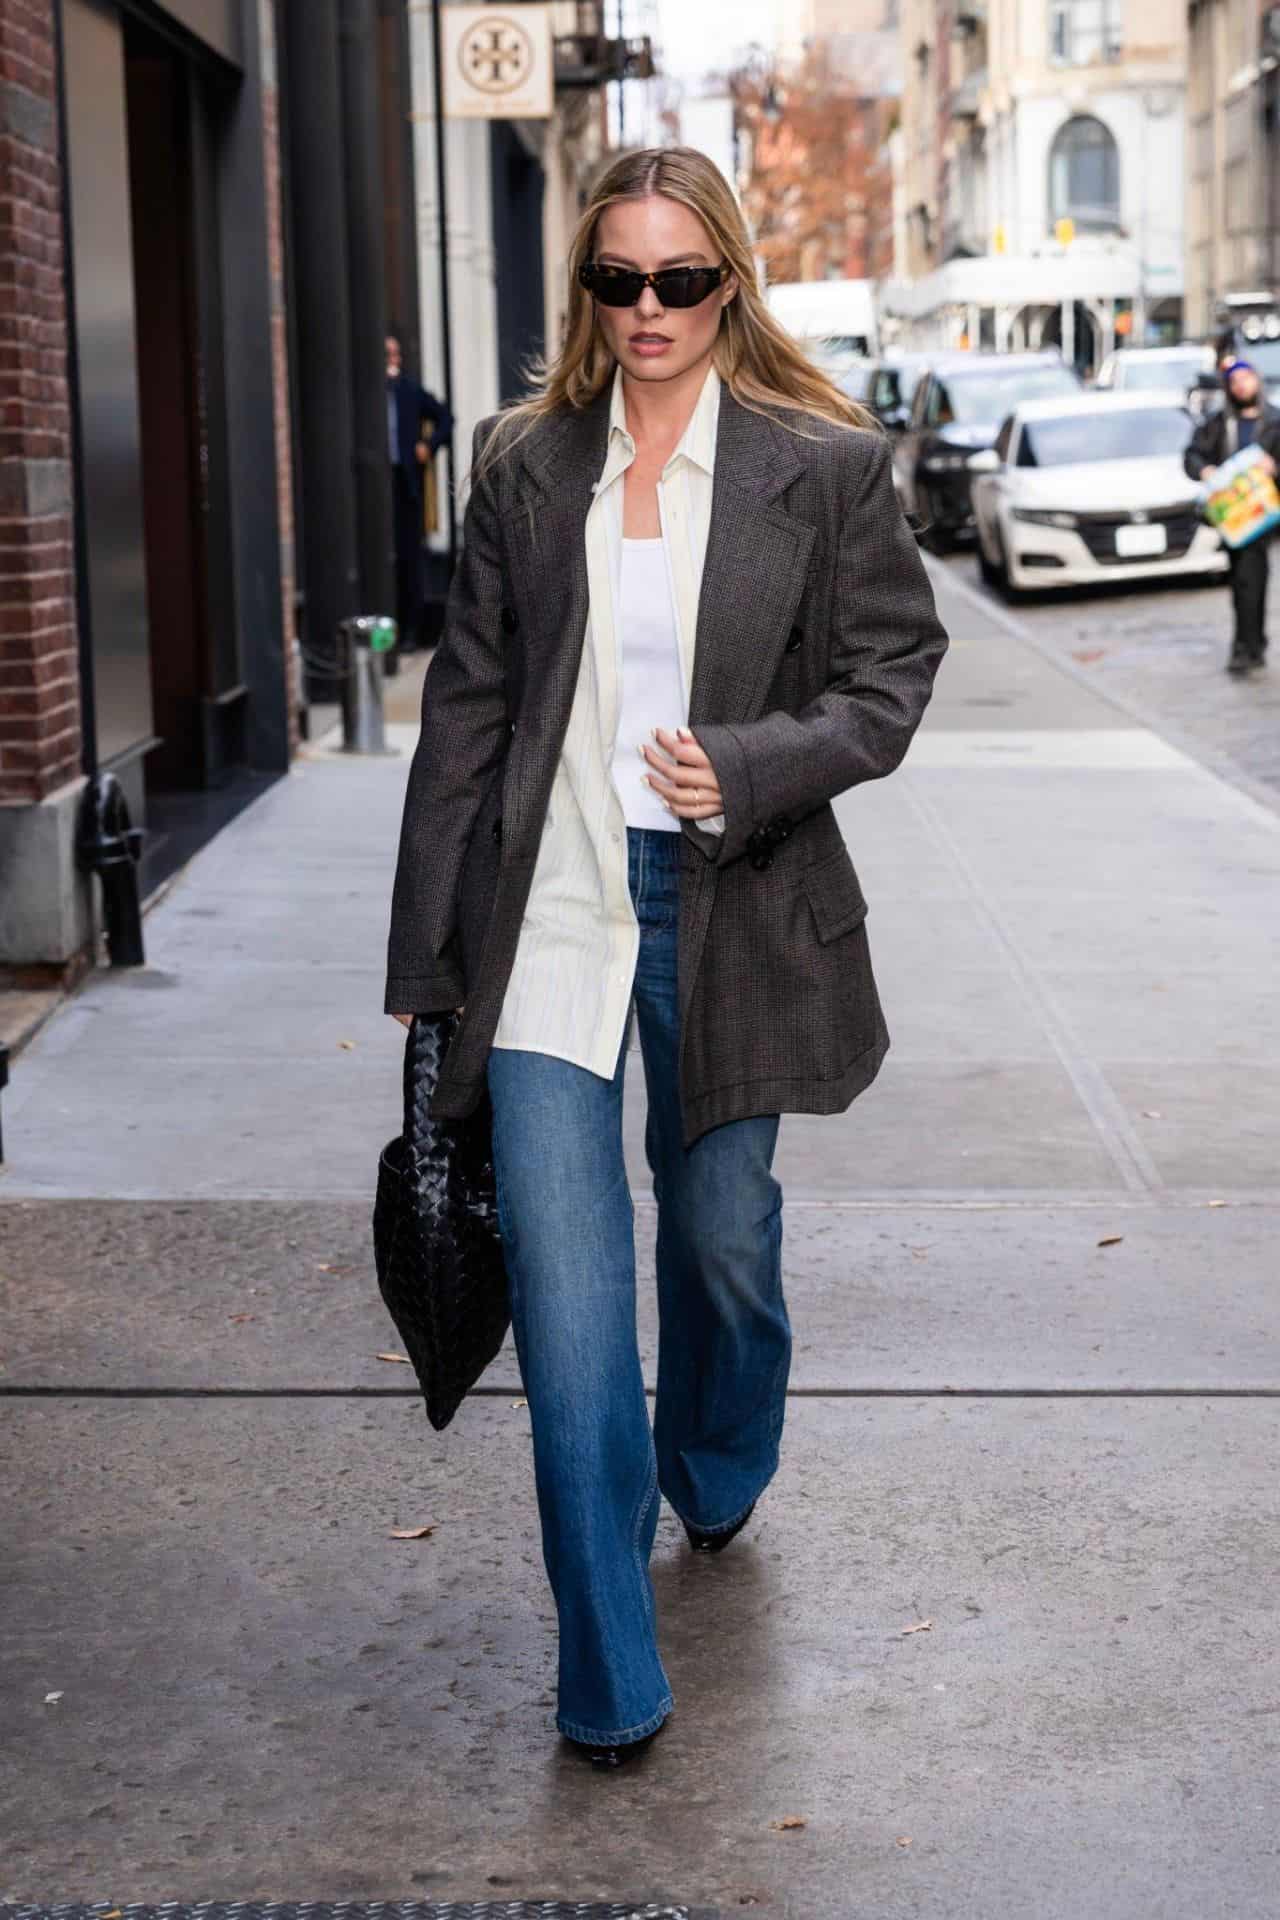 Margot Robbie Proves Less is More with Minimalist Chic Look in NYC